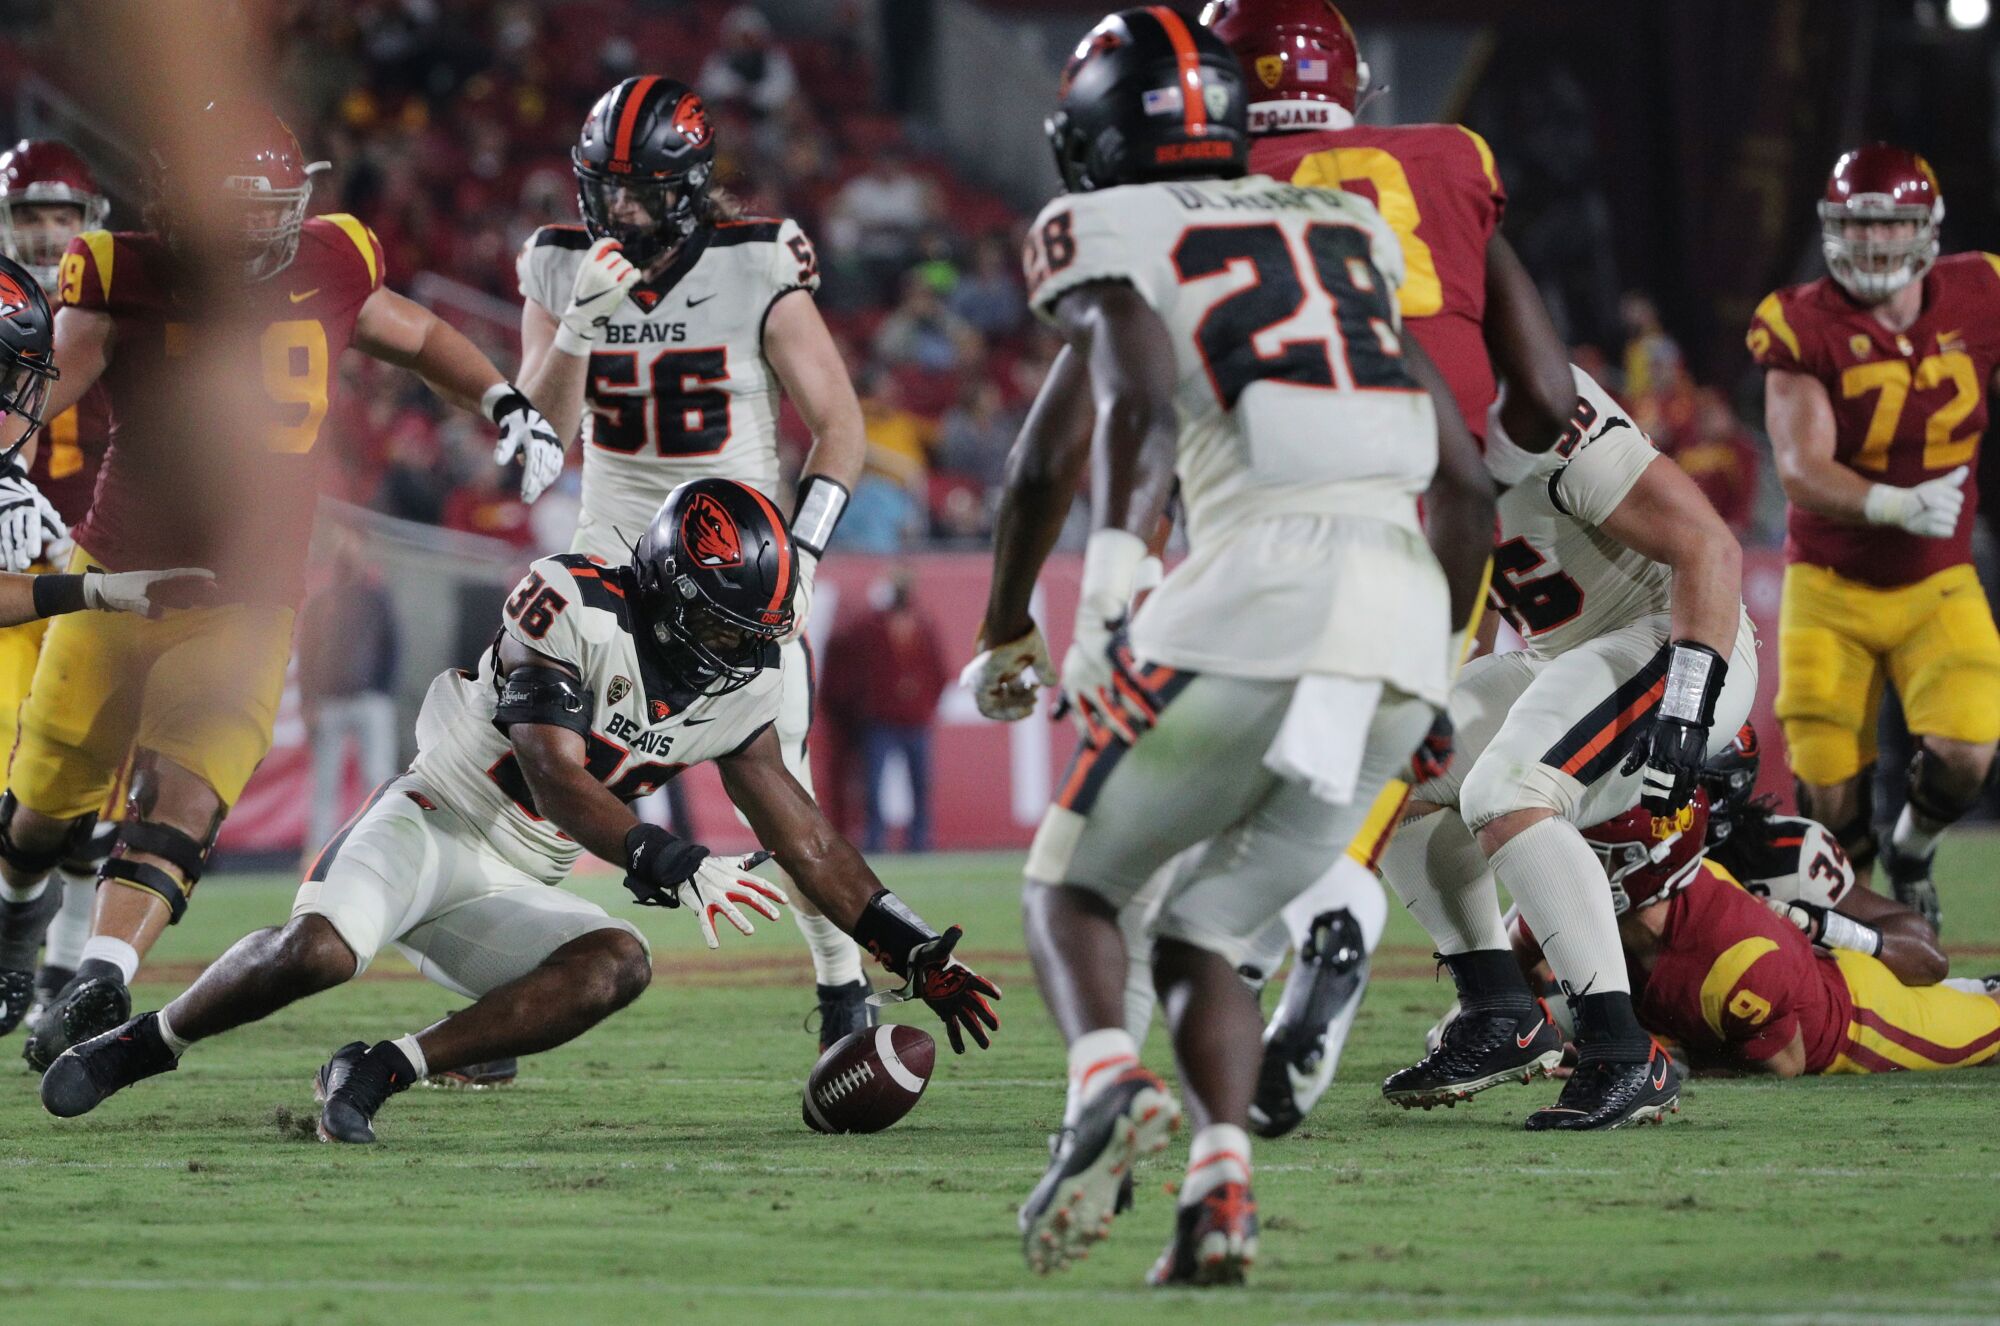 Oregon State linebacker Omar Speights recovers a fumble by USC quarterback Kedon Slovis in the third quarter.